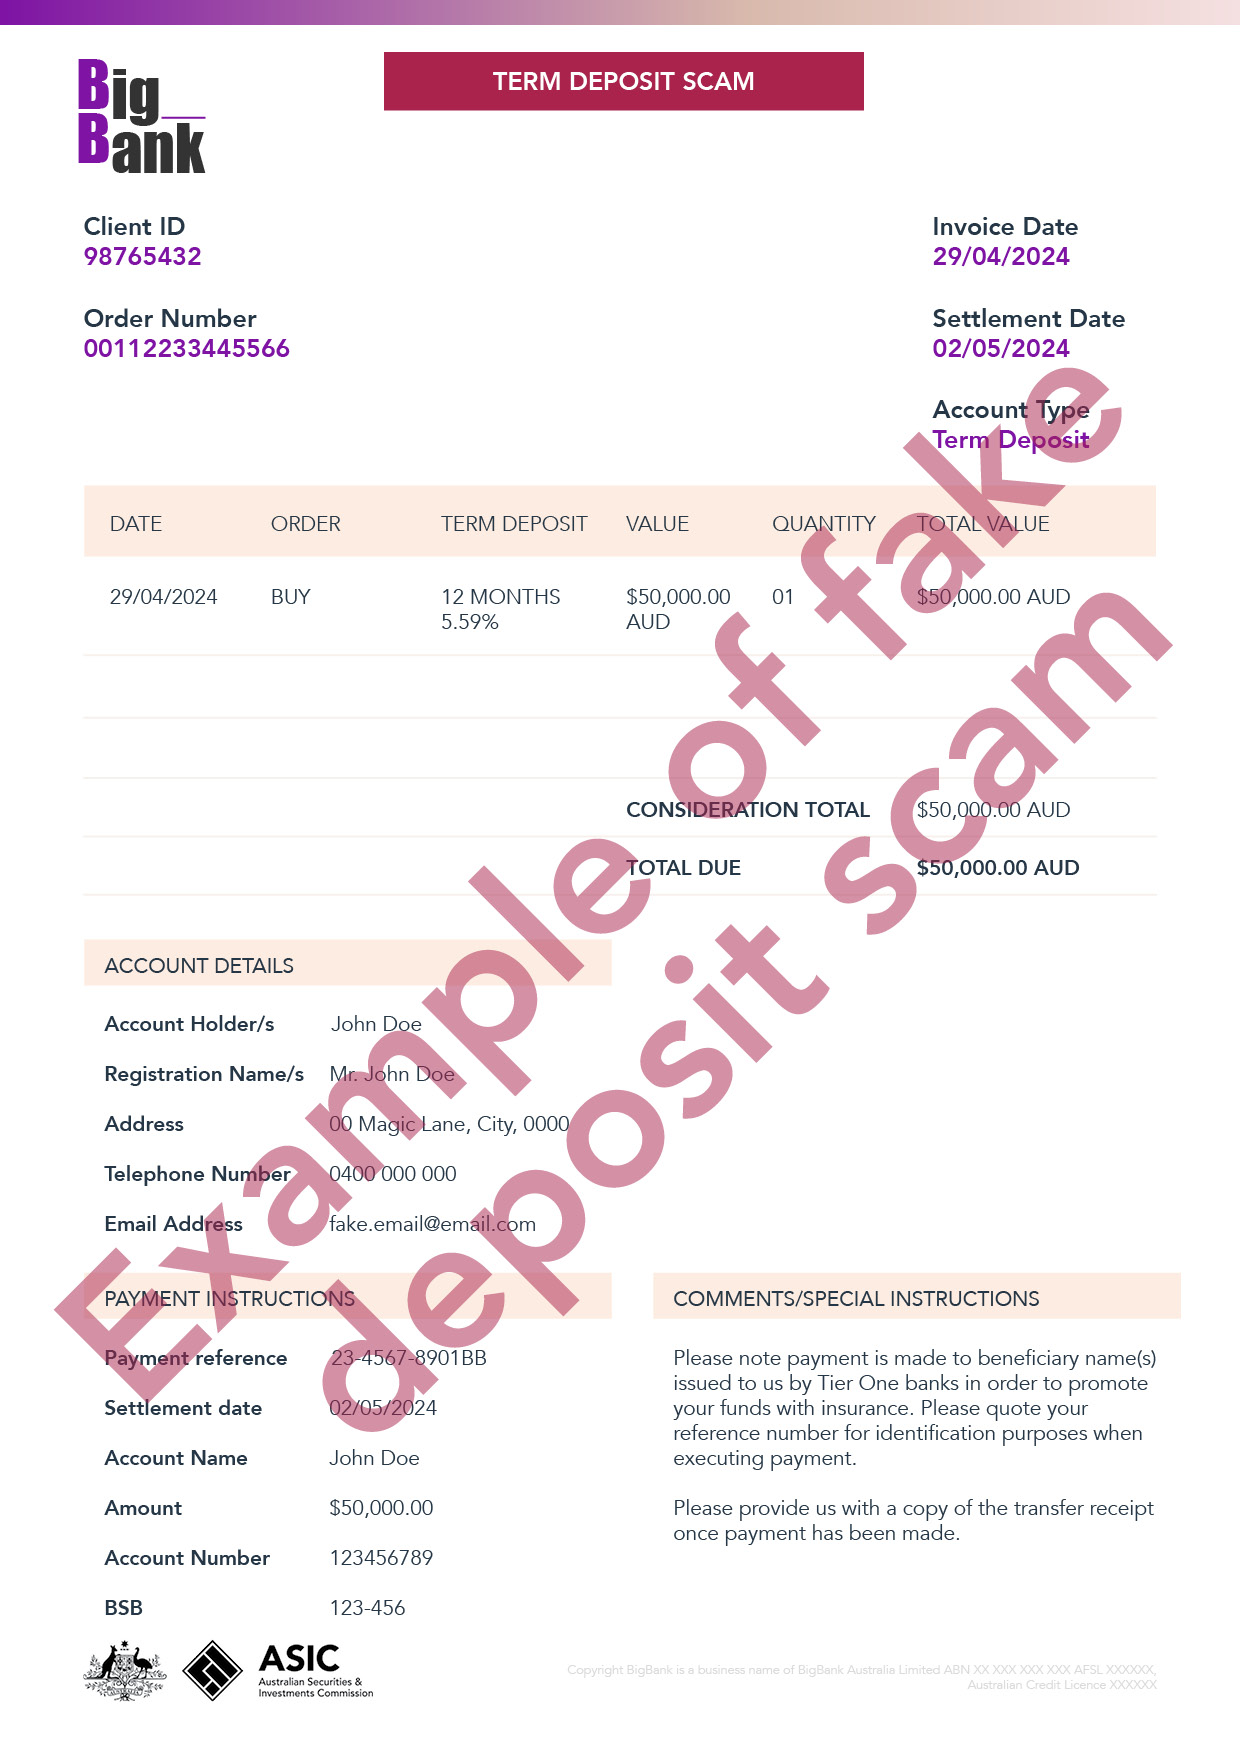 Example 2: Term deposit scam - a fake investment document showing a client segregated account that is in the consumer's name.